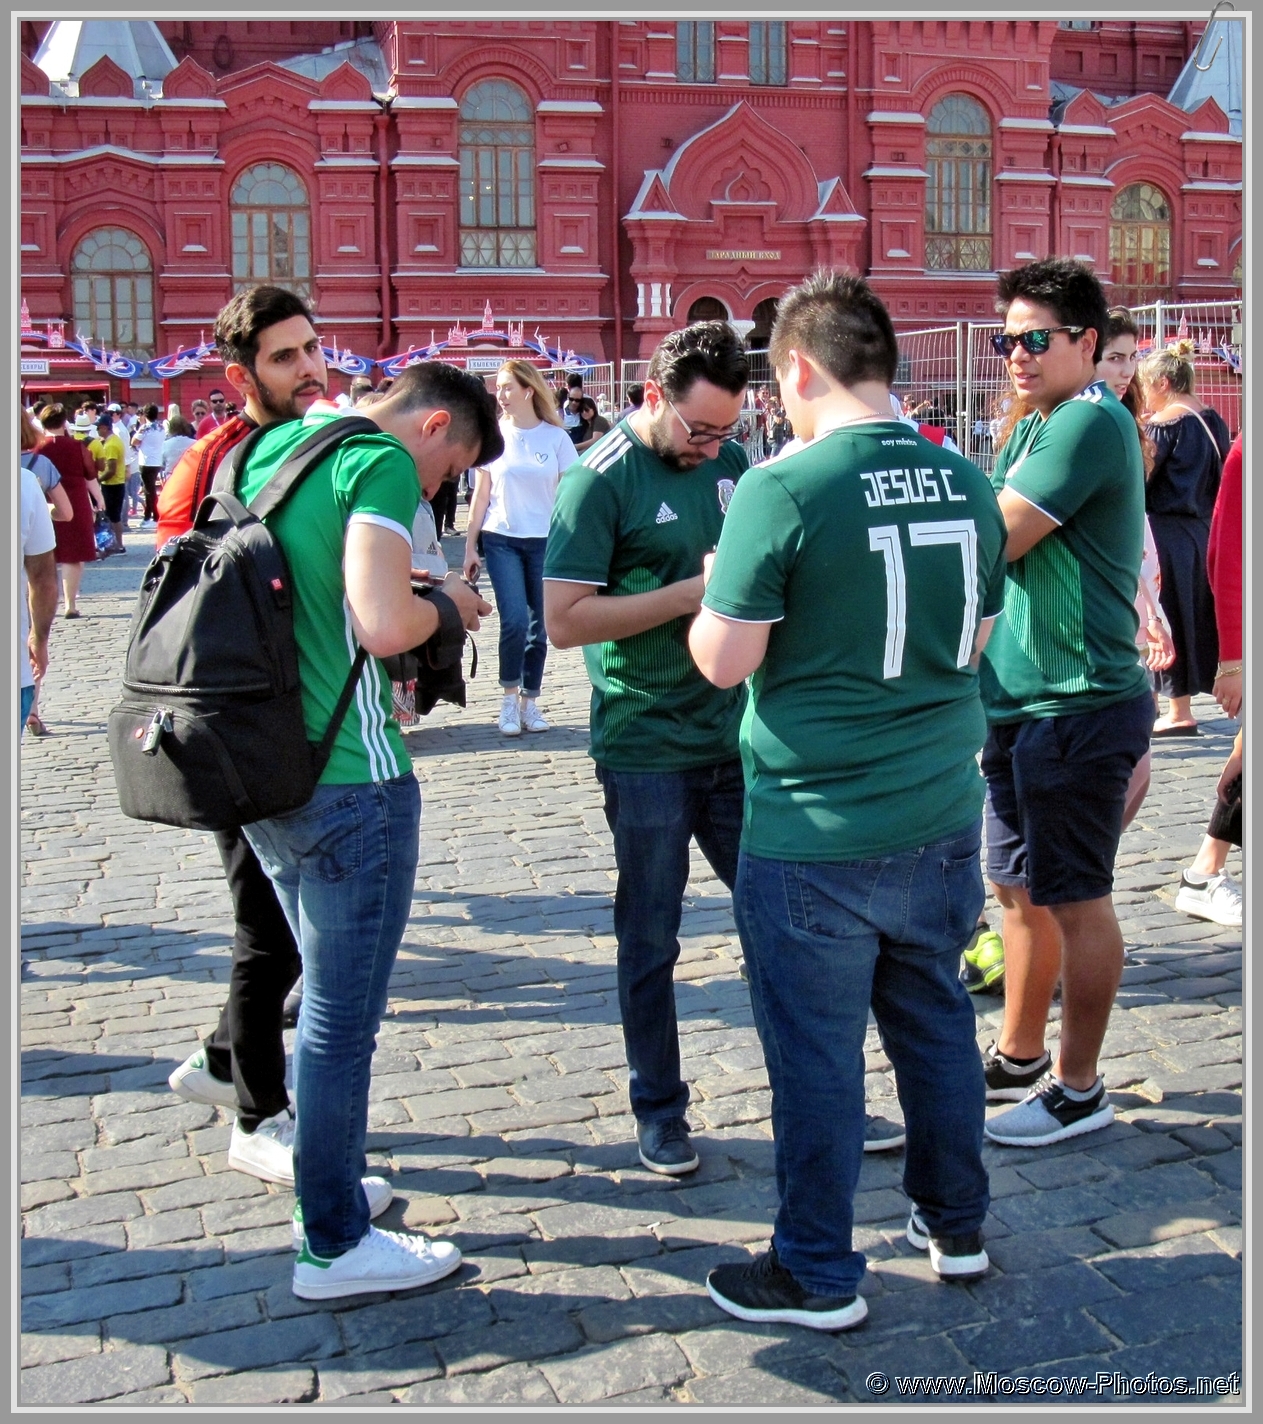 Football fans on Red Square in Moscow during the 2018 FIFA World Cup